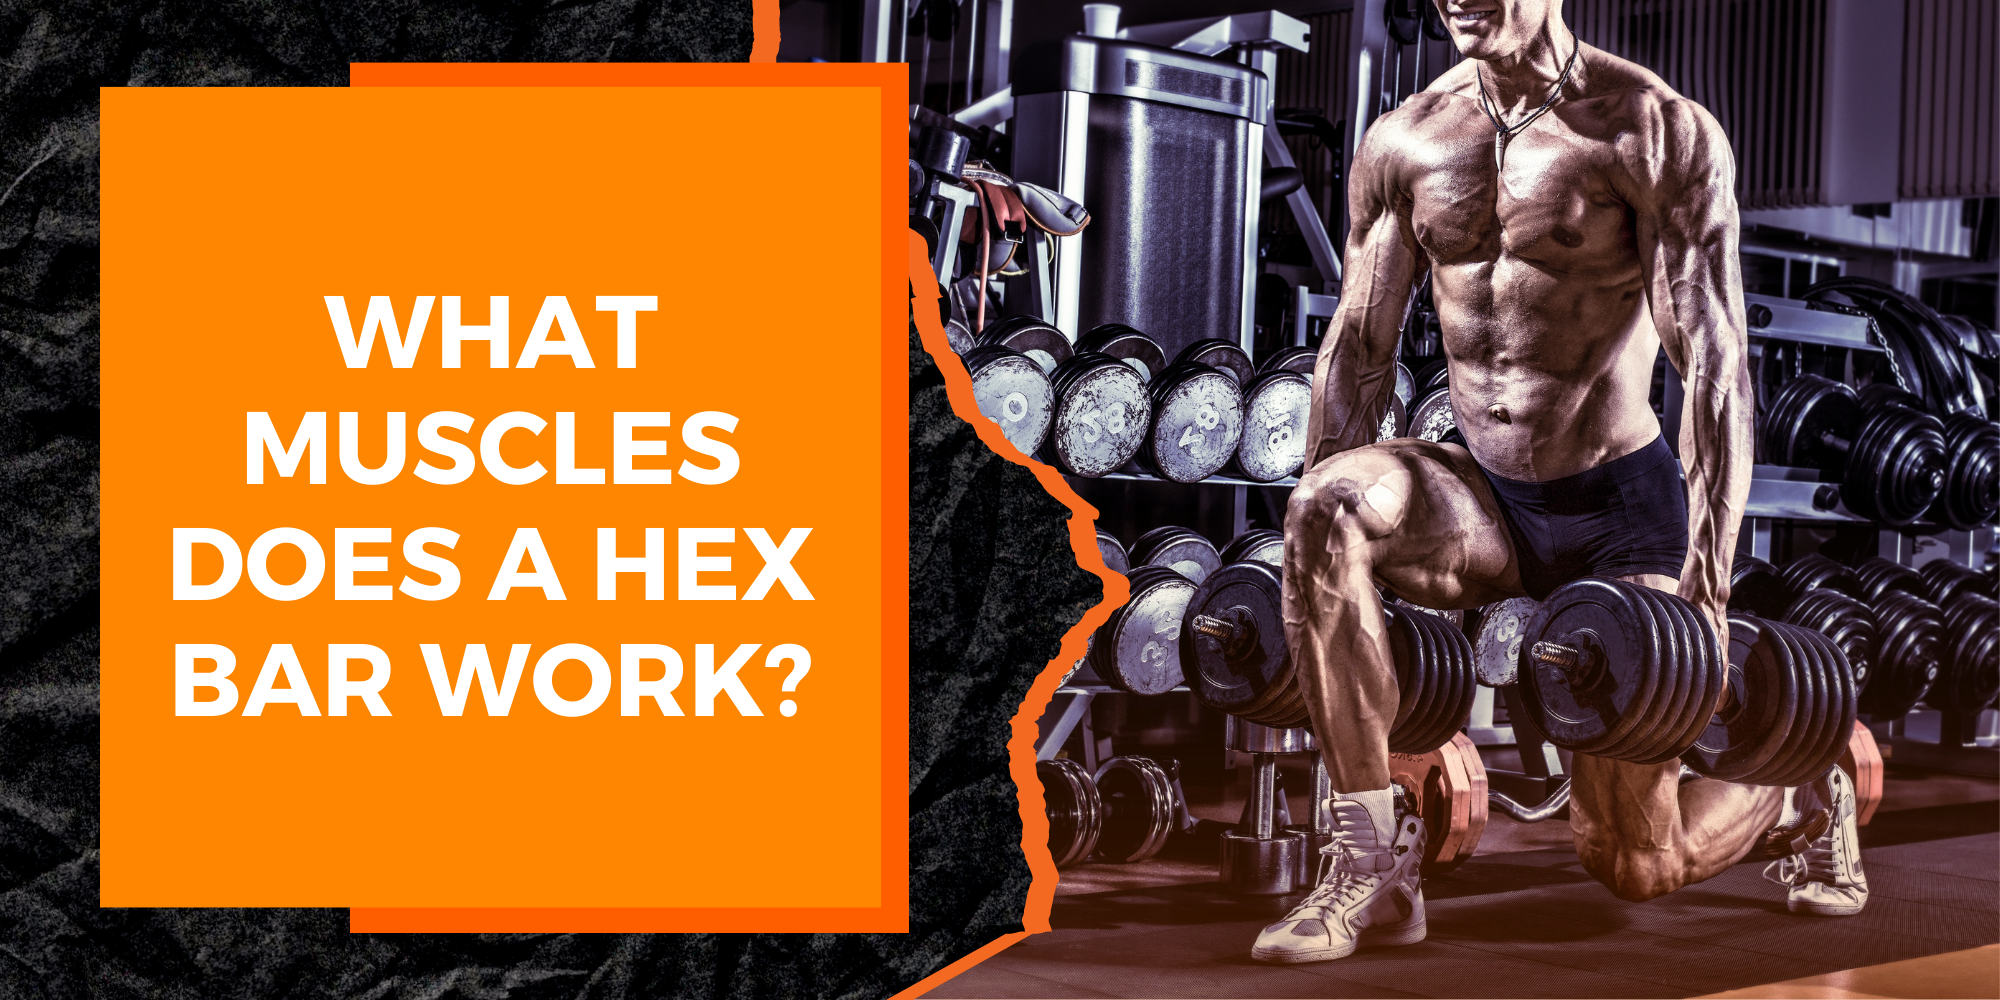 What Muscles Does a Hex Bar Work?